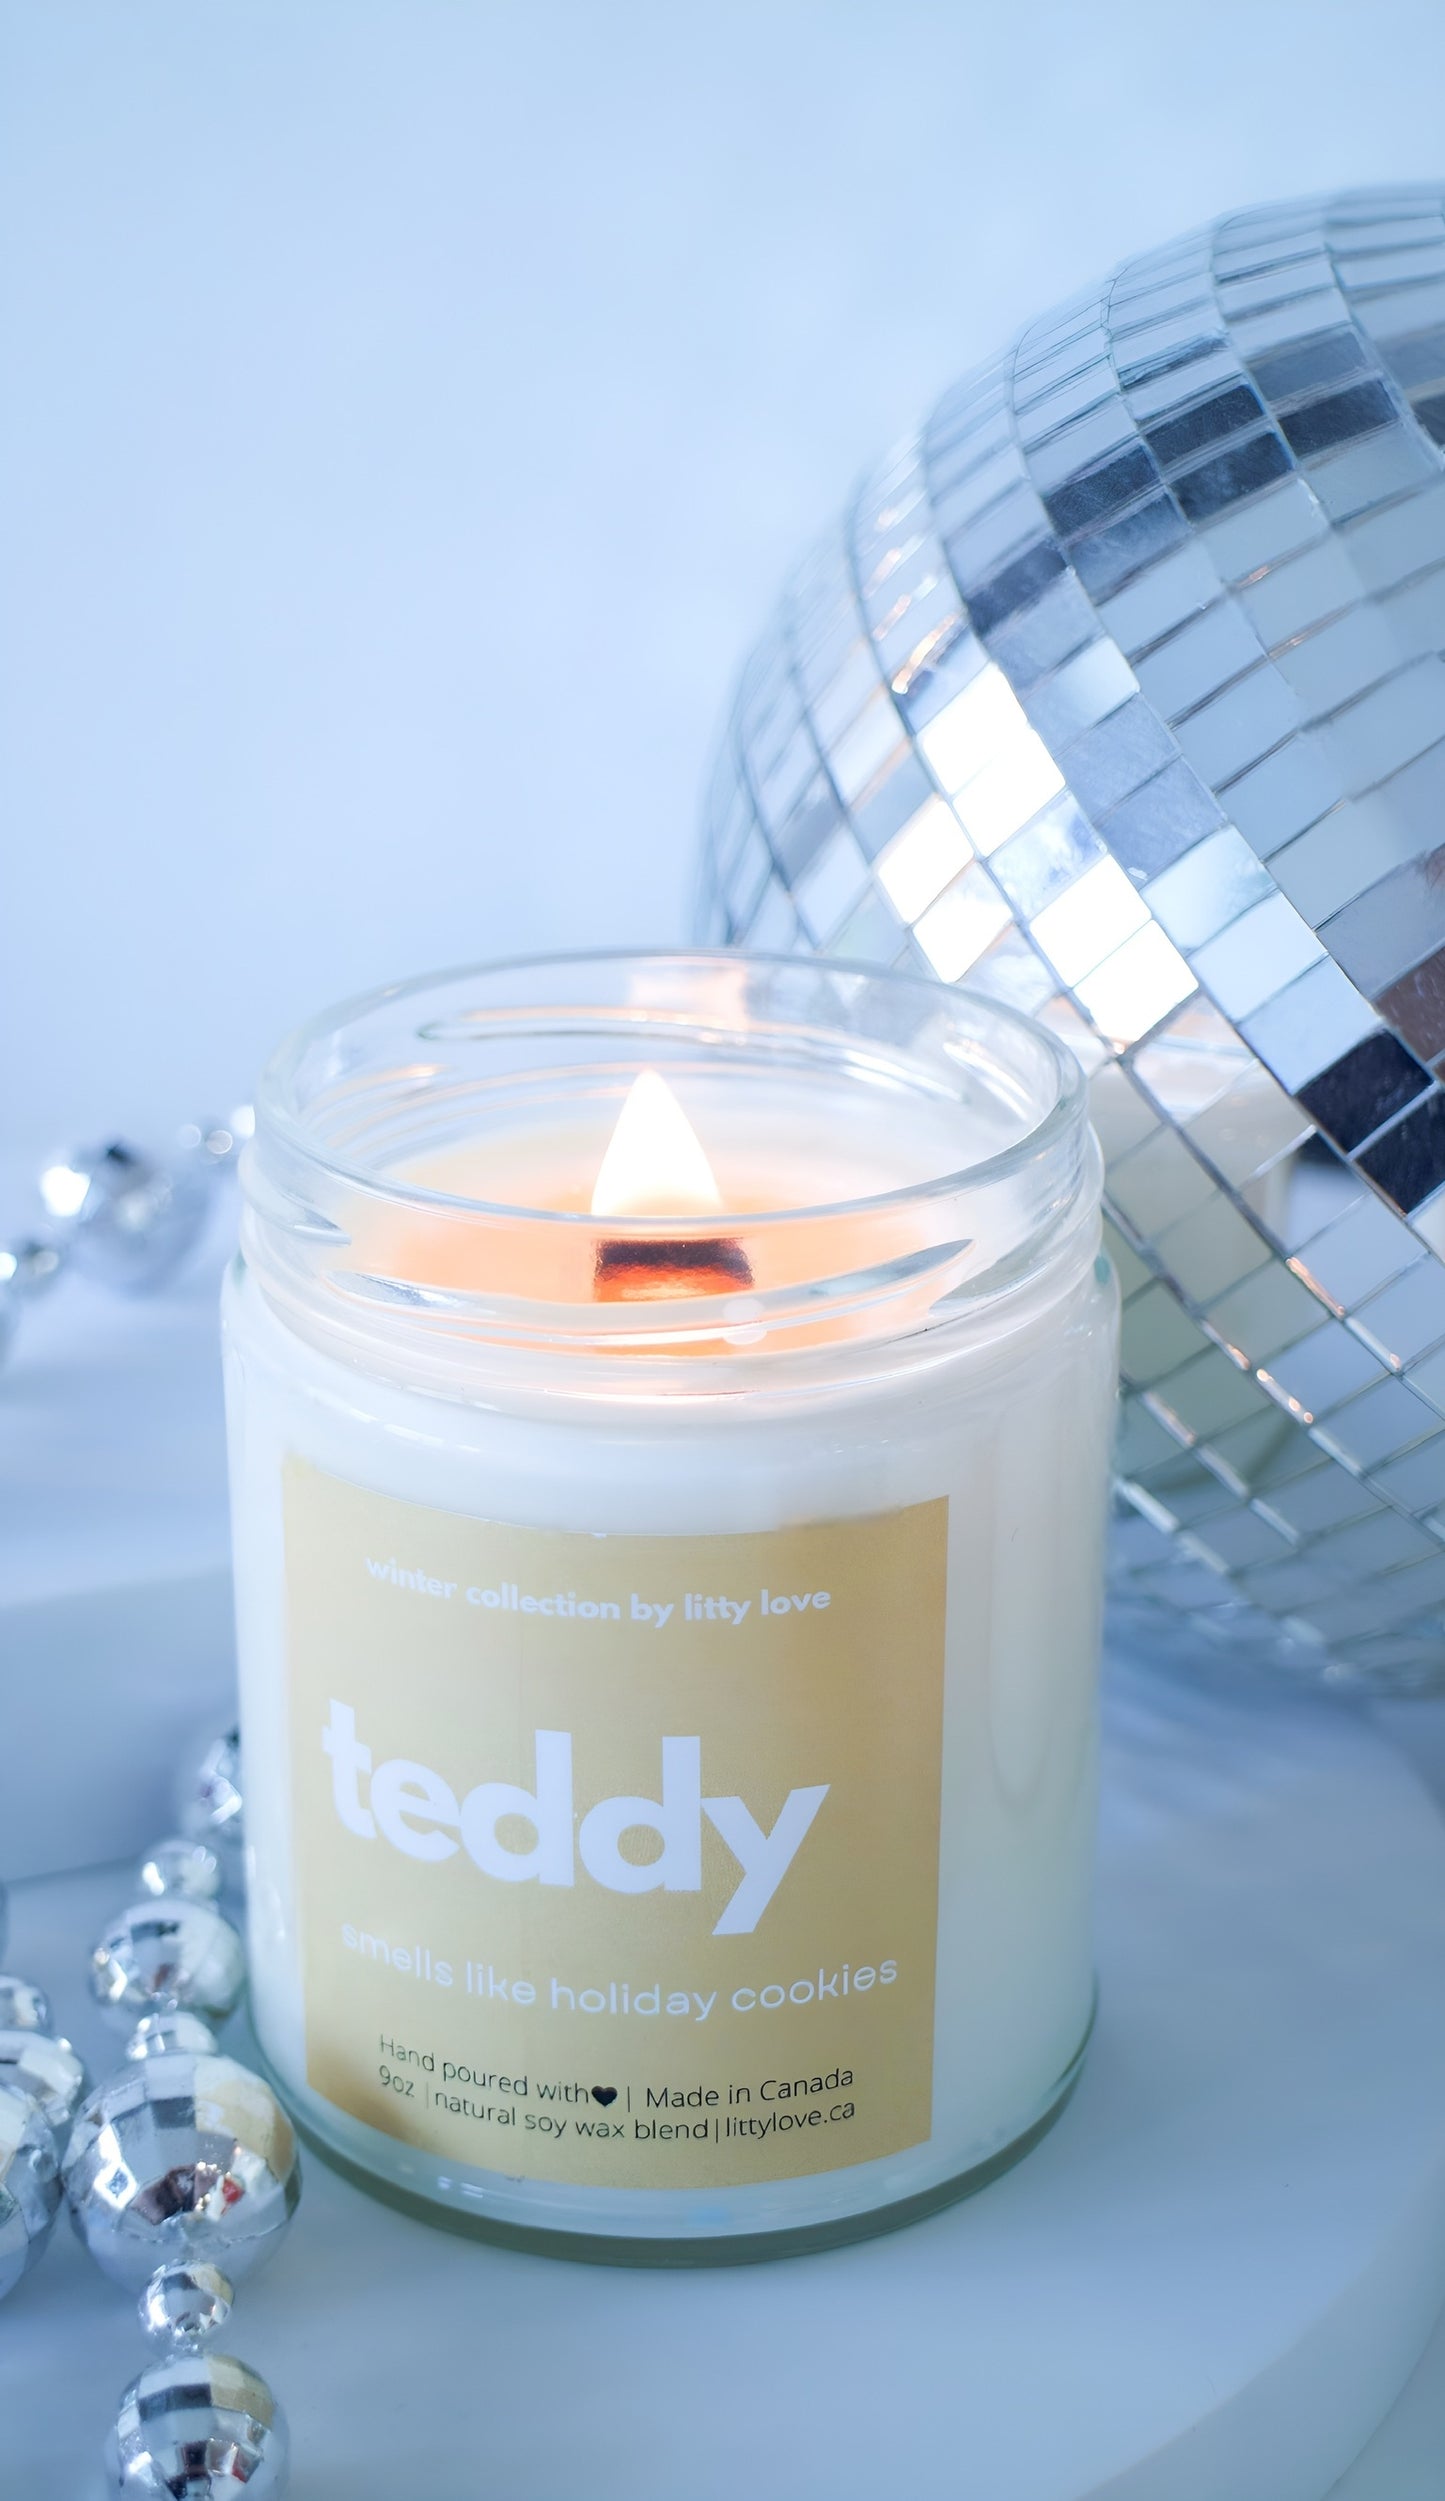 Teddy - 9oz holiday cookies candle